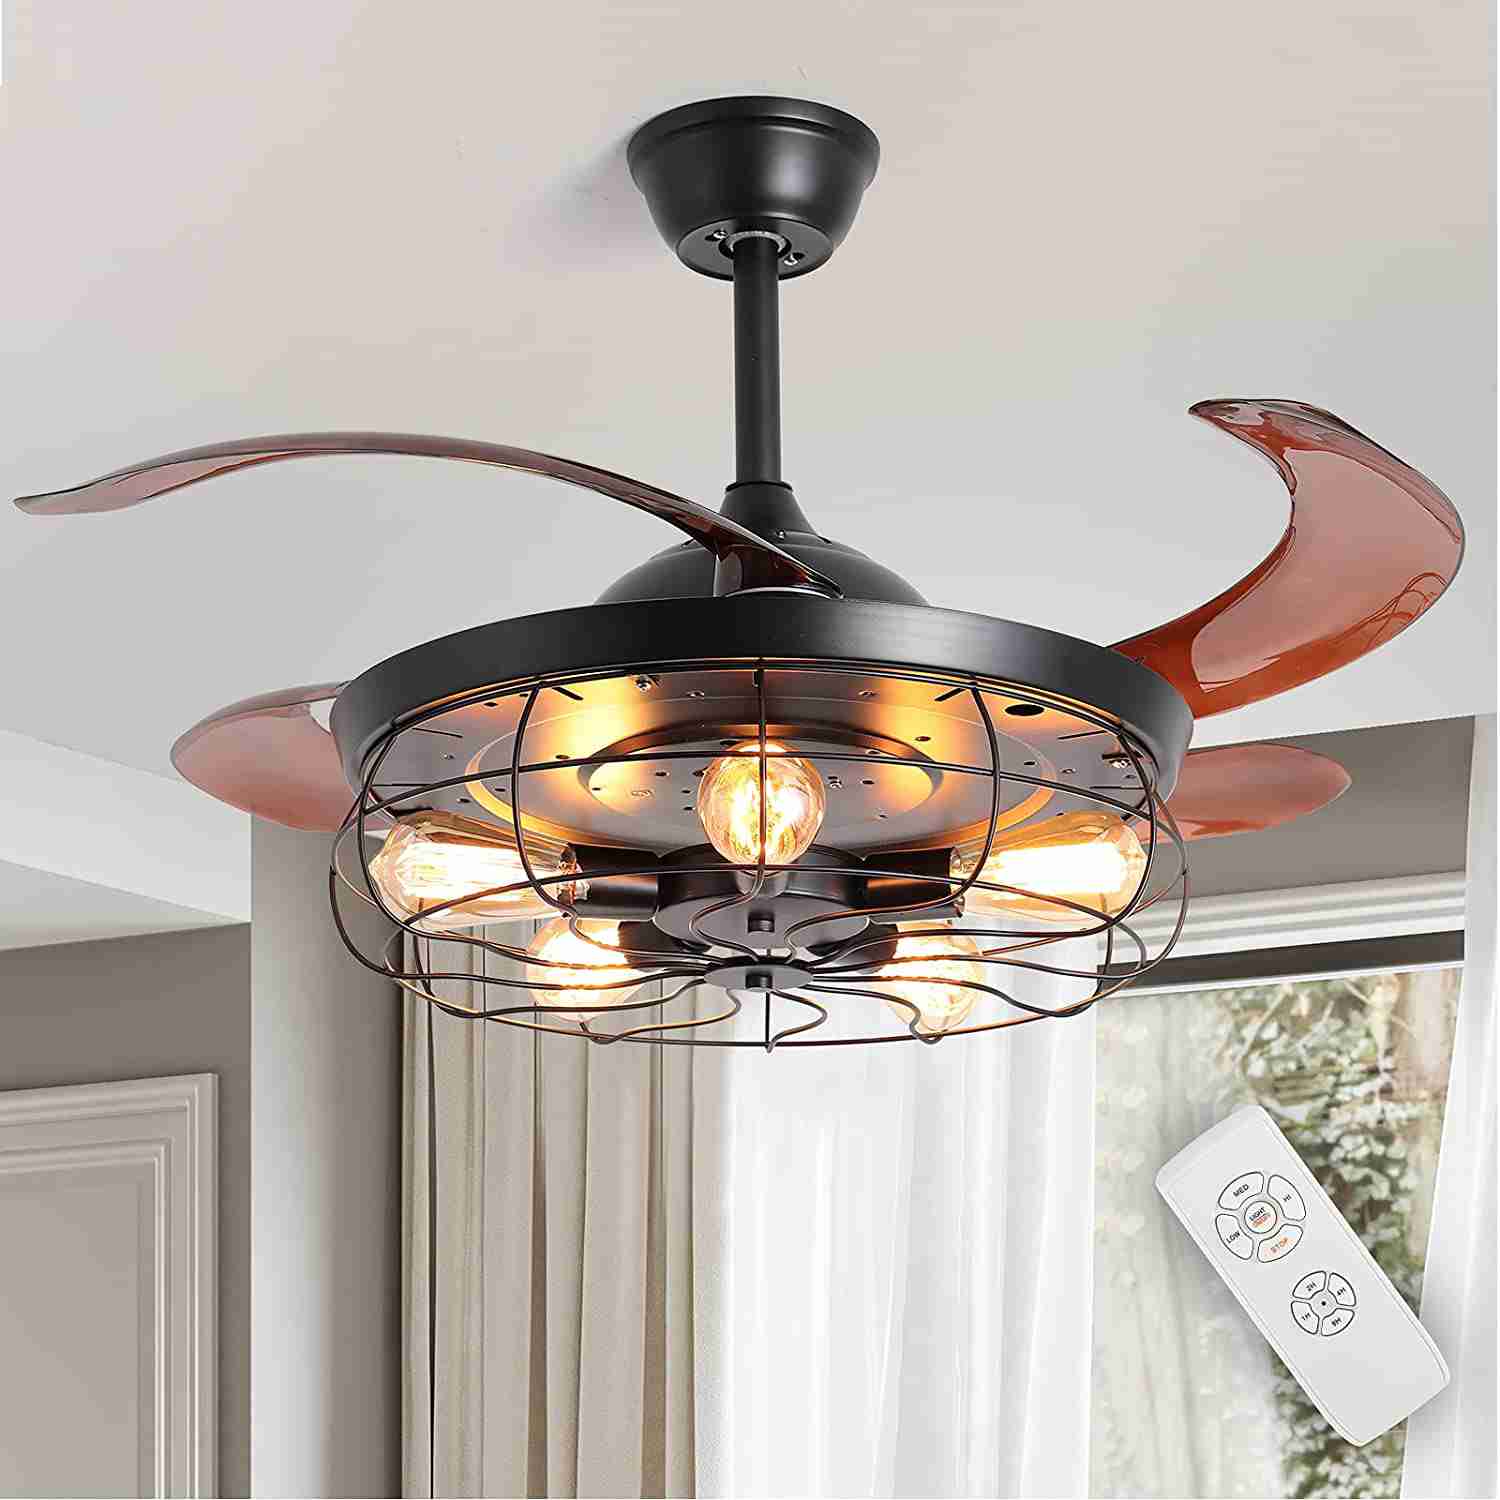 industrial-retractable-ceiling-fan with cash back rebate